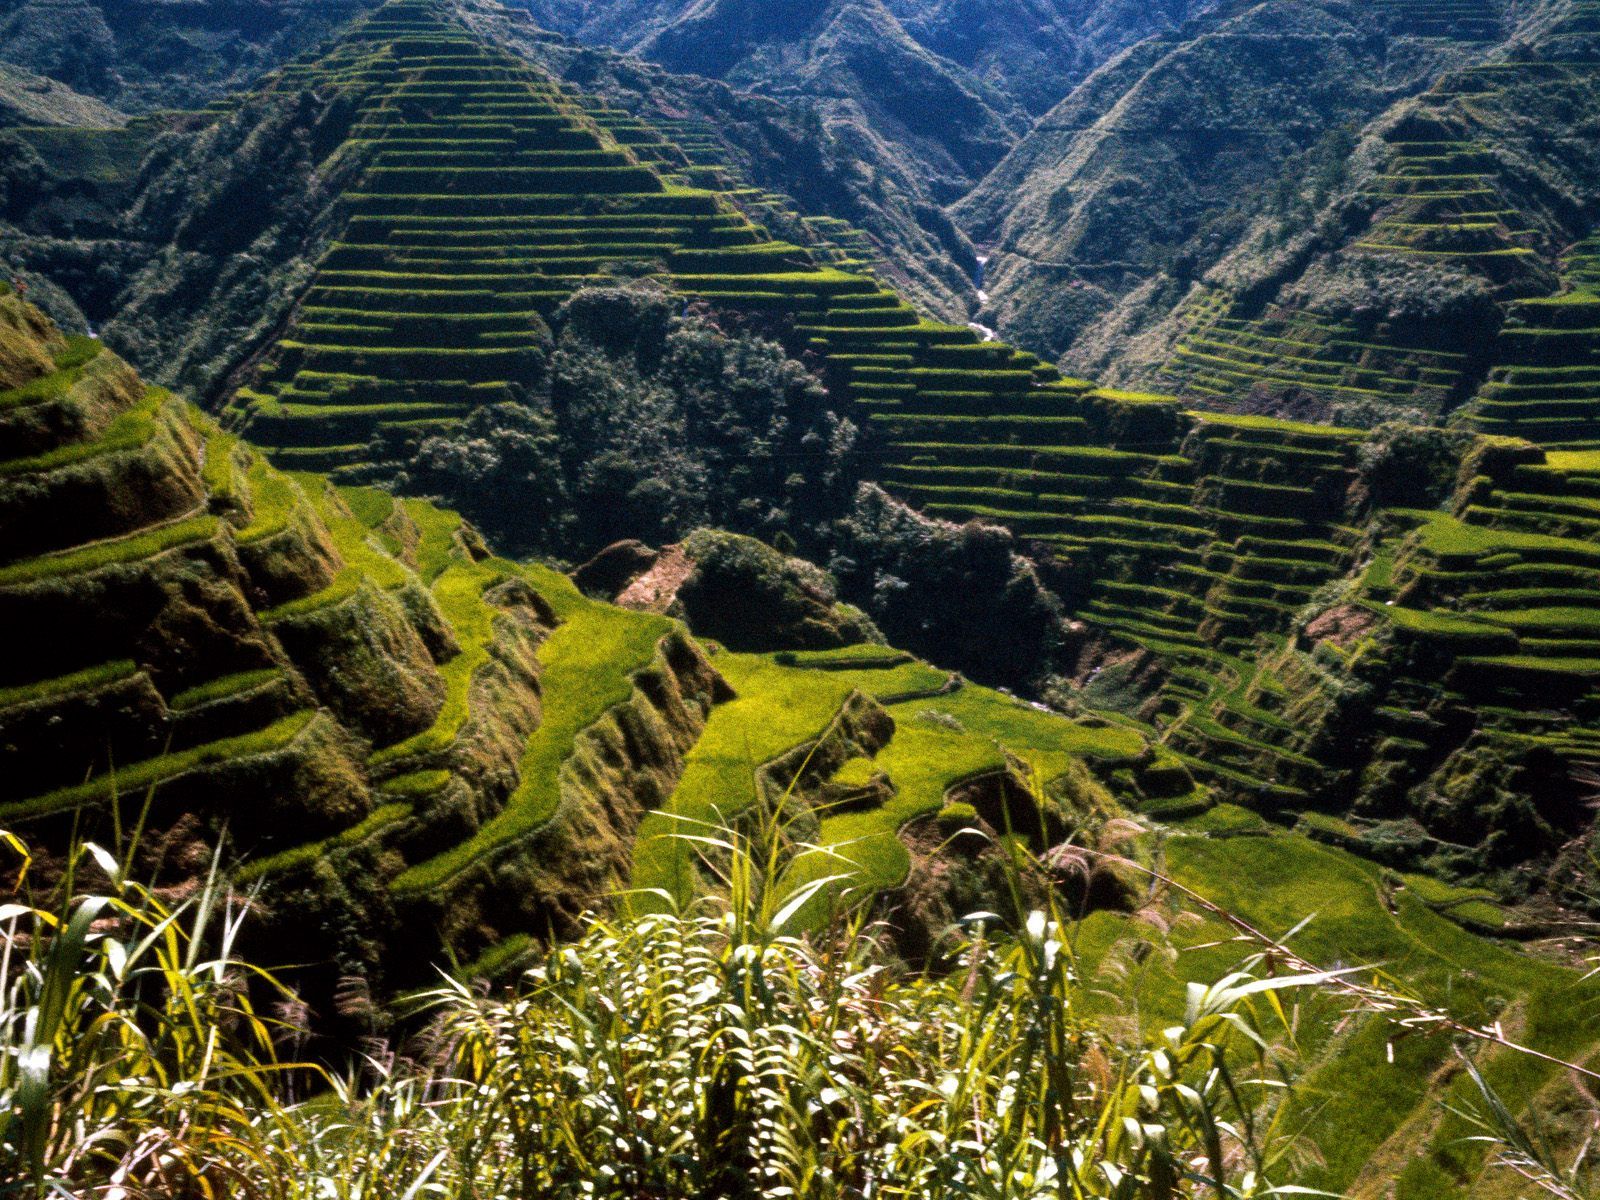 Ancient Rice Terraces / Philippines wallpapers and images